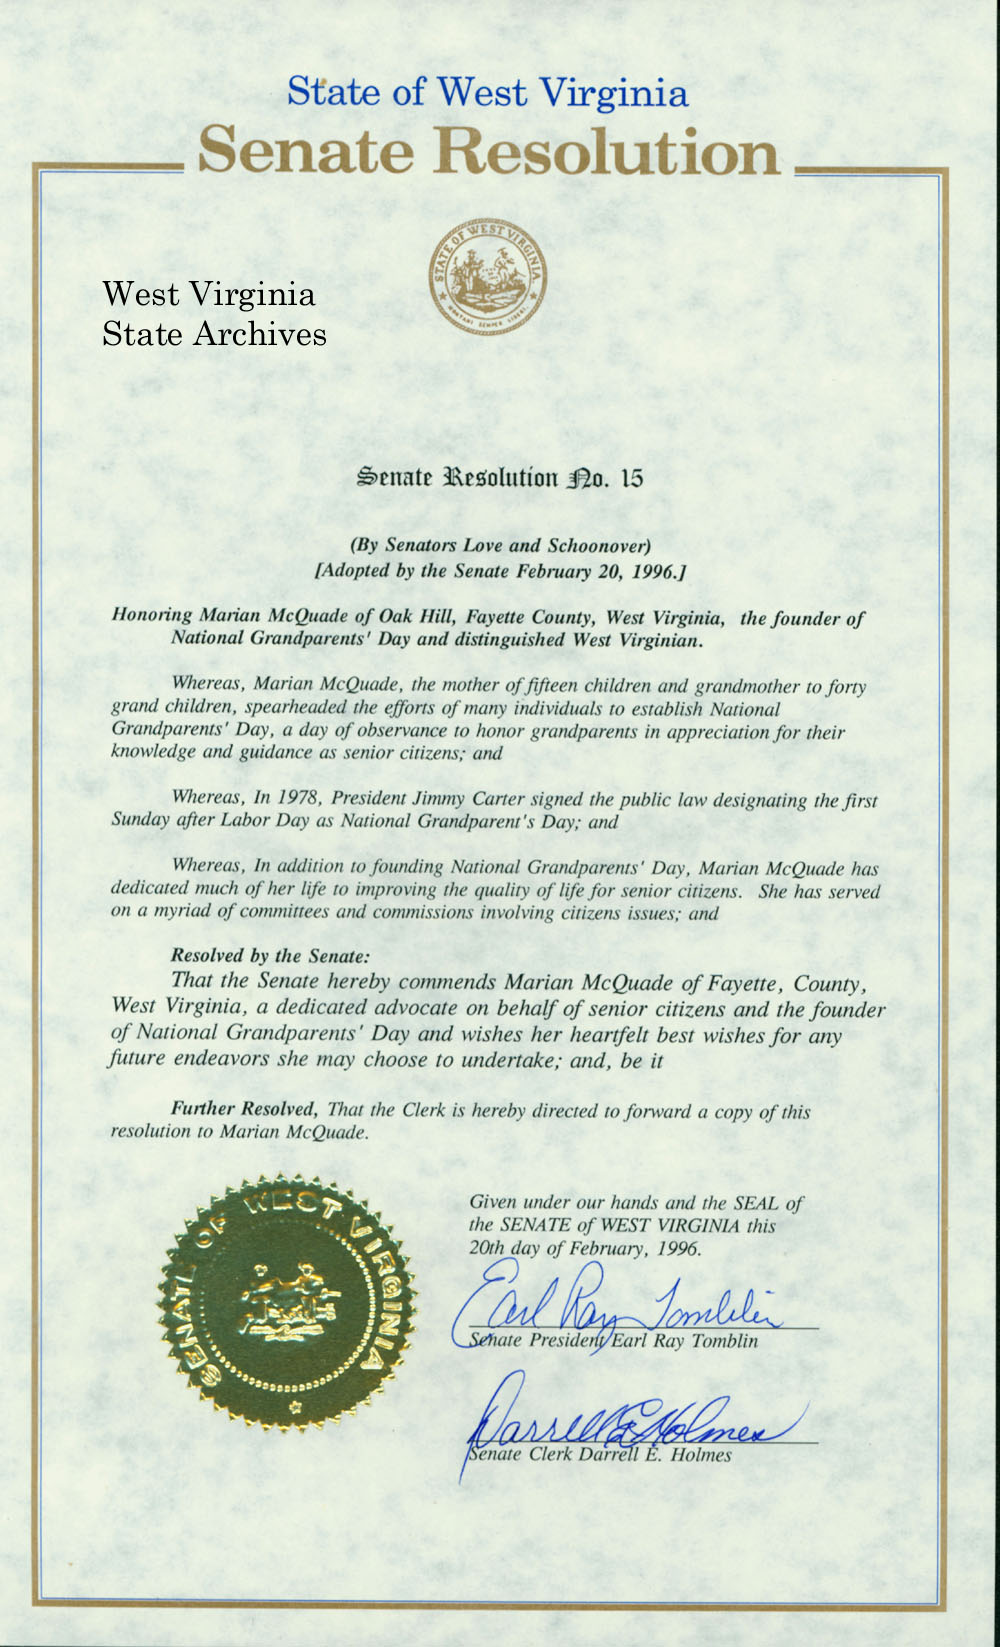 Senate resolution honoring Marian McQuade, founder of National Grandparents Day, 1996. (Ms2011-098)